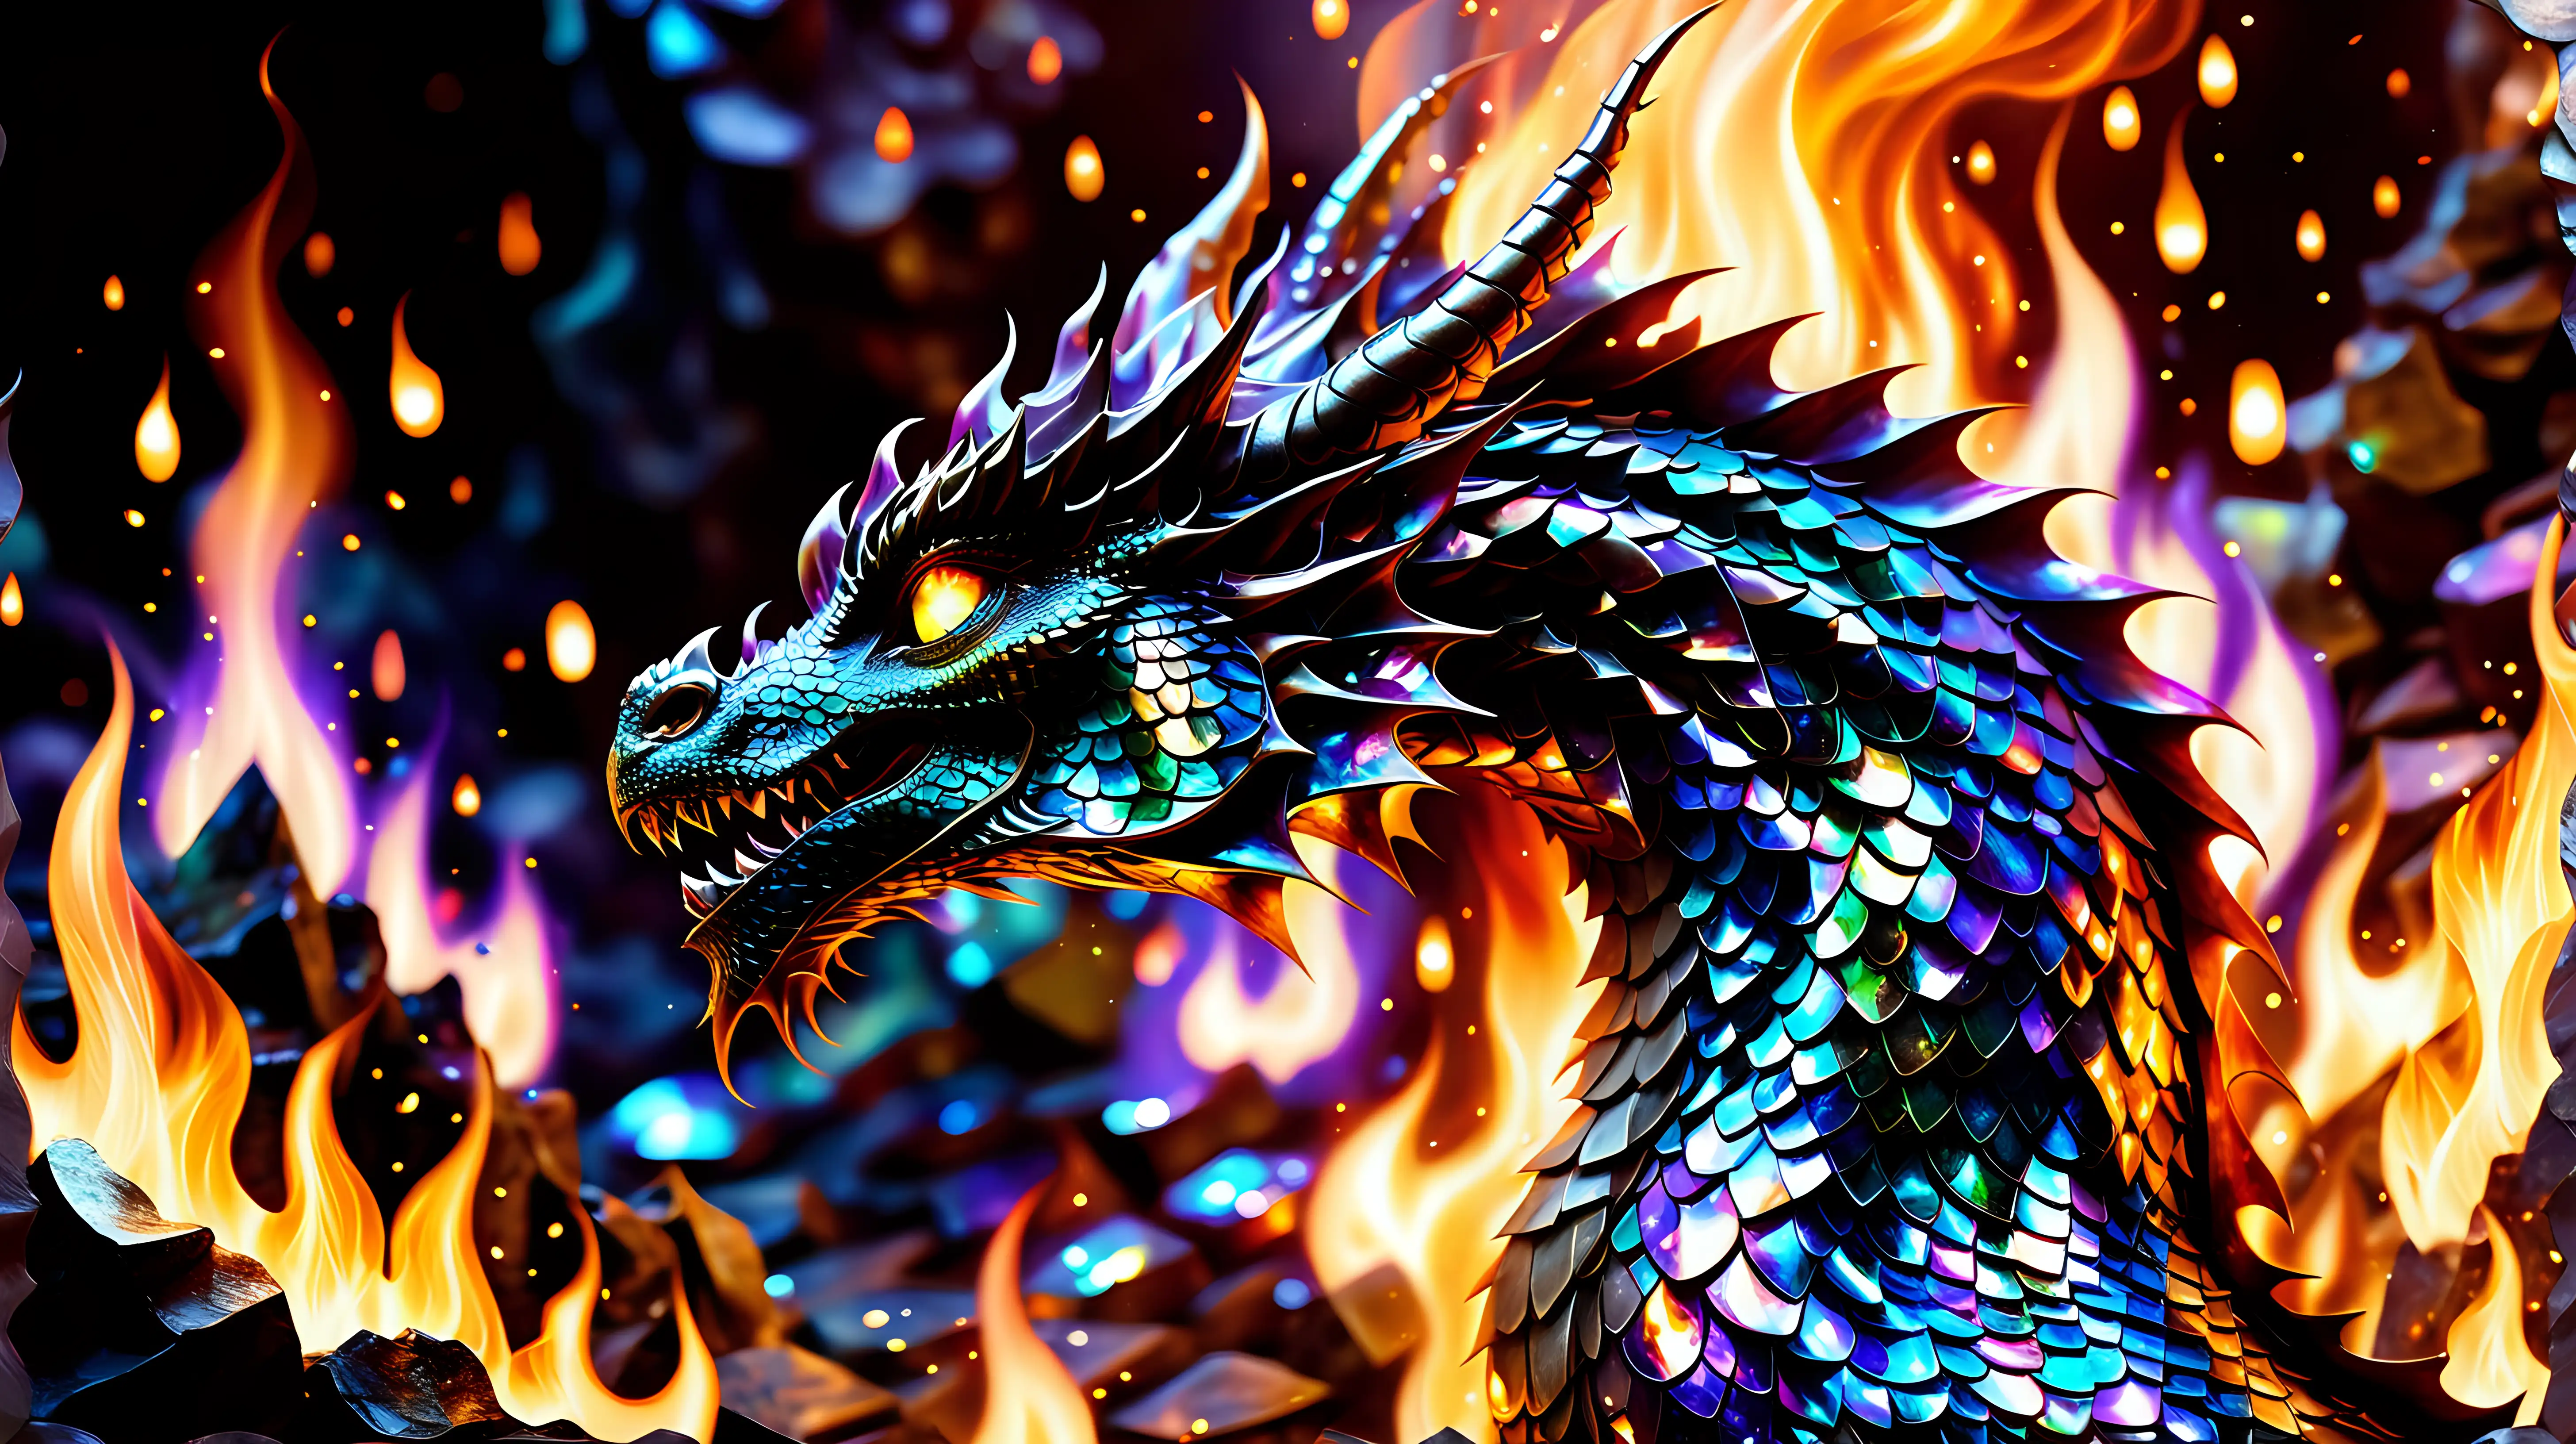 Enchanted Dragon Lair Flames Amidst Iridescent Scales